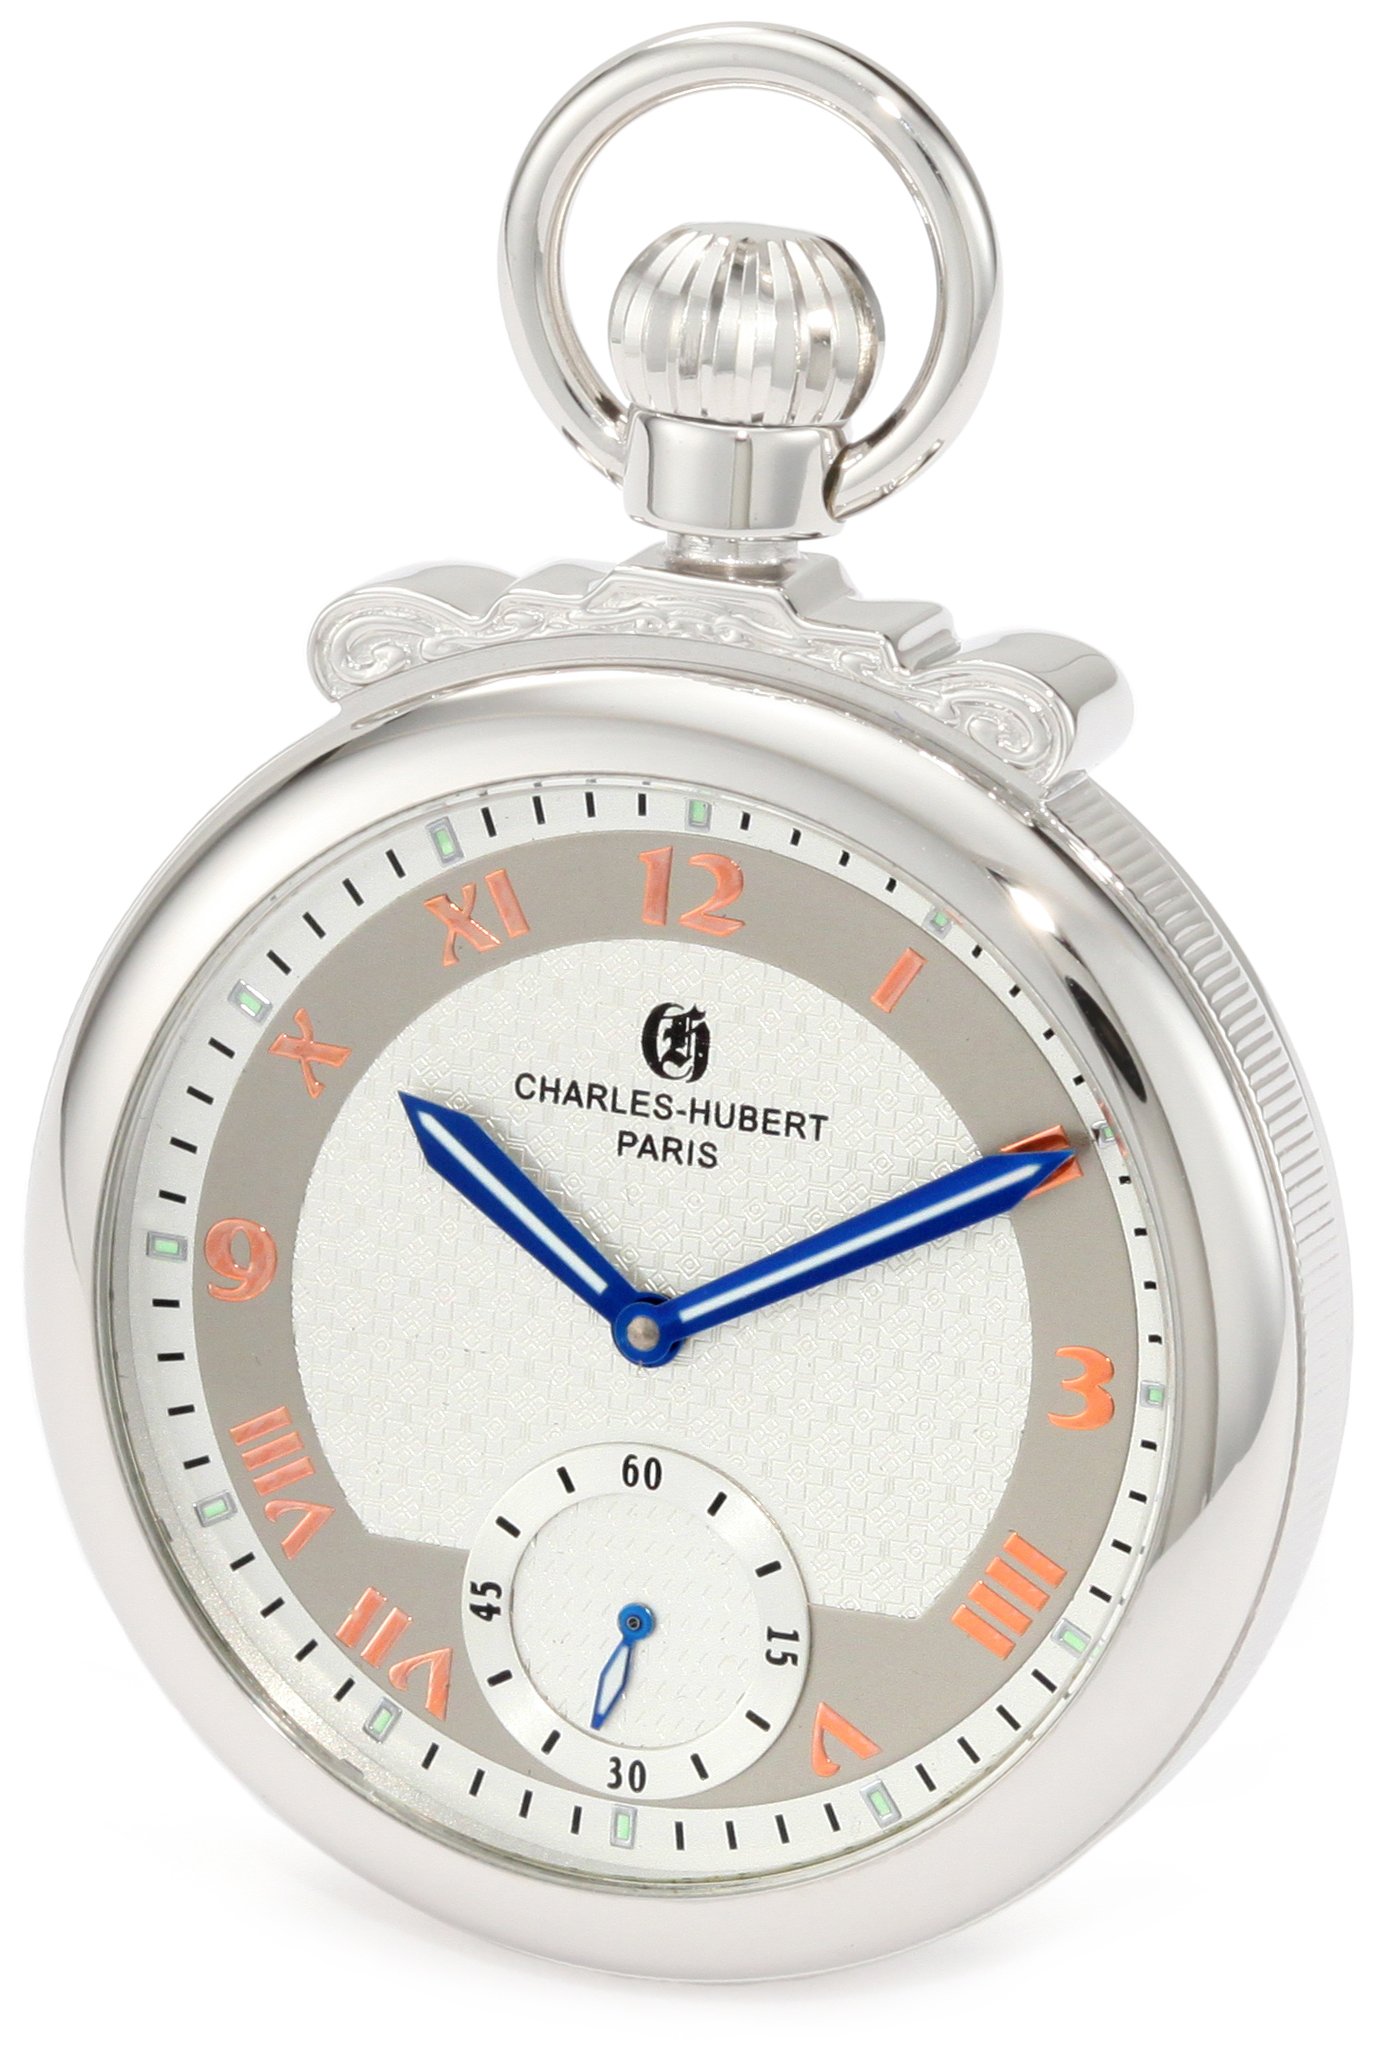 Charles-Hubert, Paris 3873-W Classic Collection Polished Finish Open Face Mechanical Pocket Watch